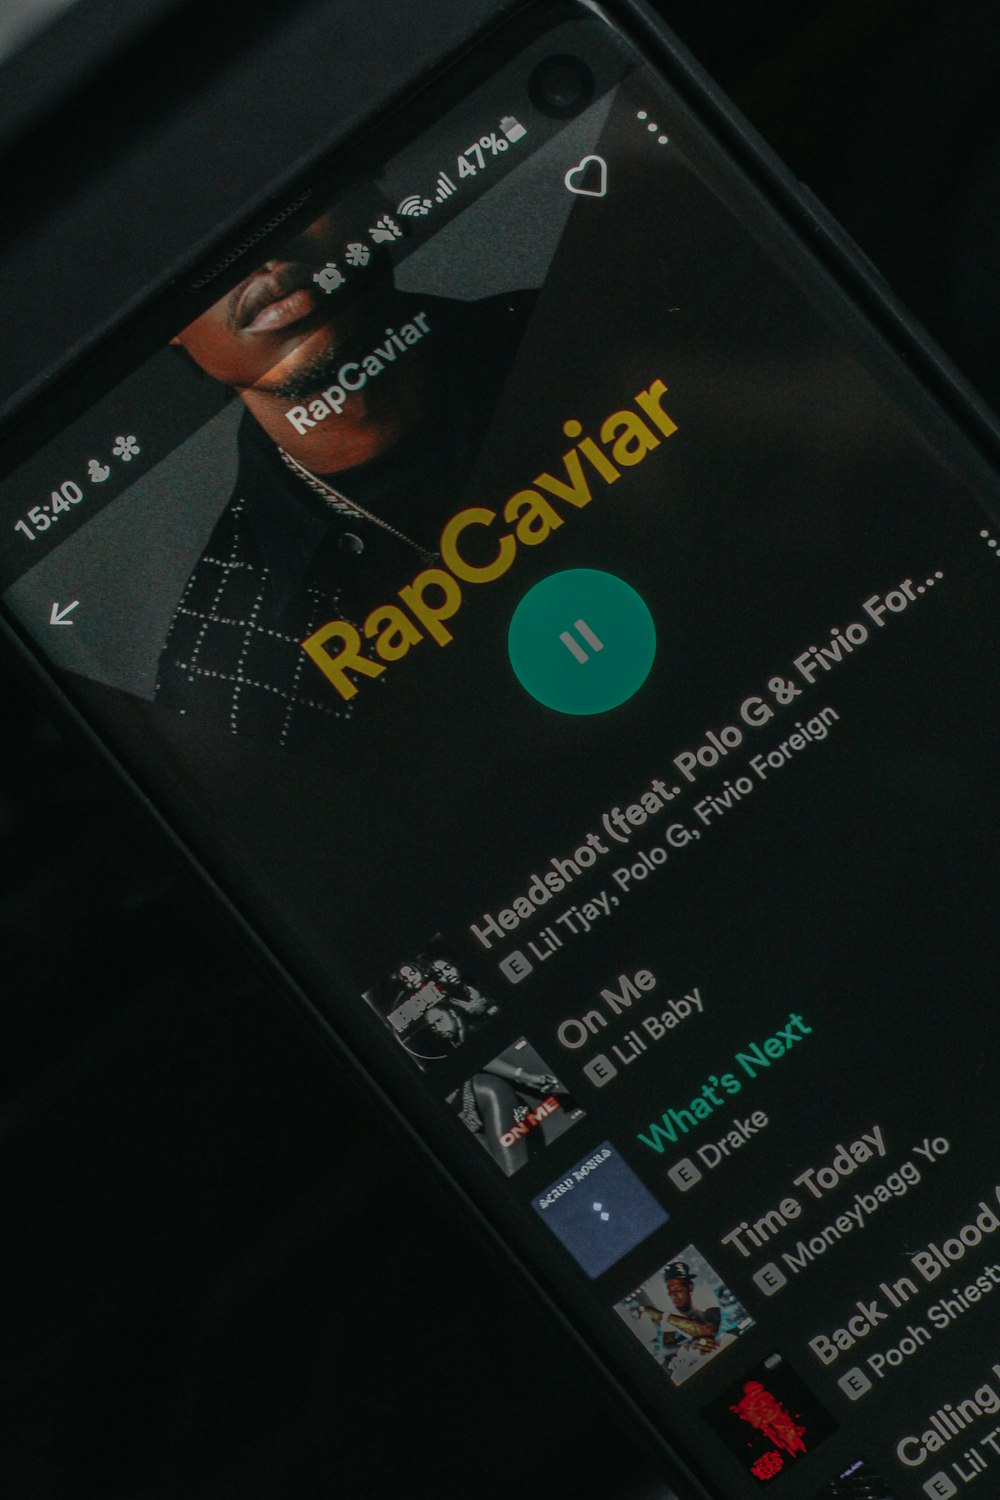 a close up of a cell phone with rapcaviar on the screen